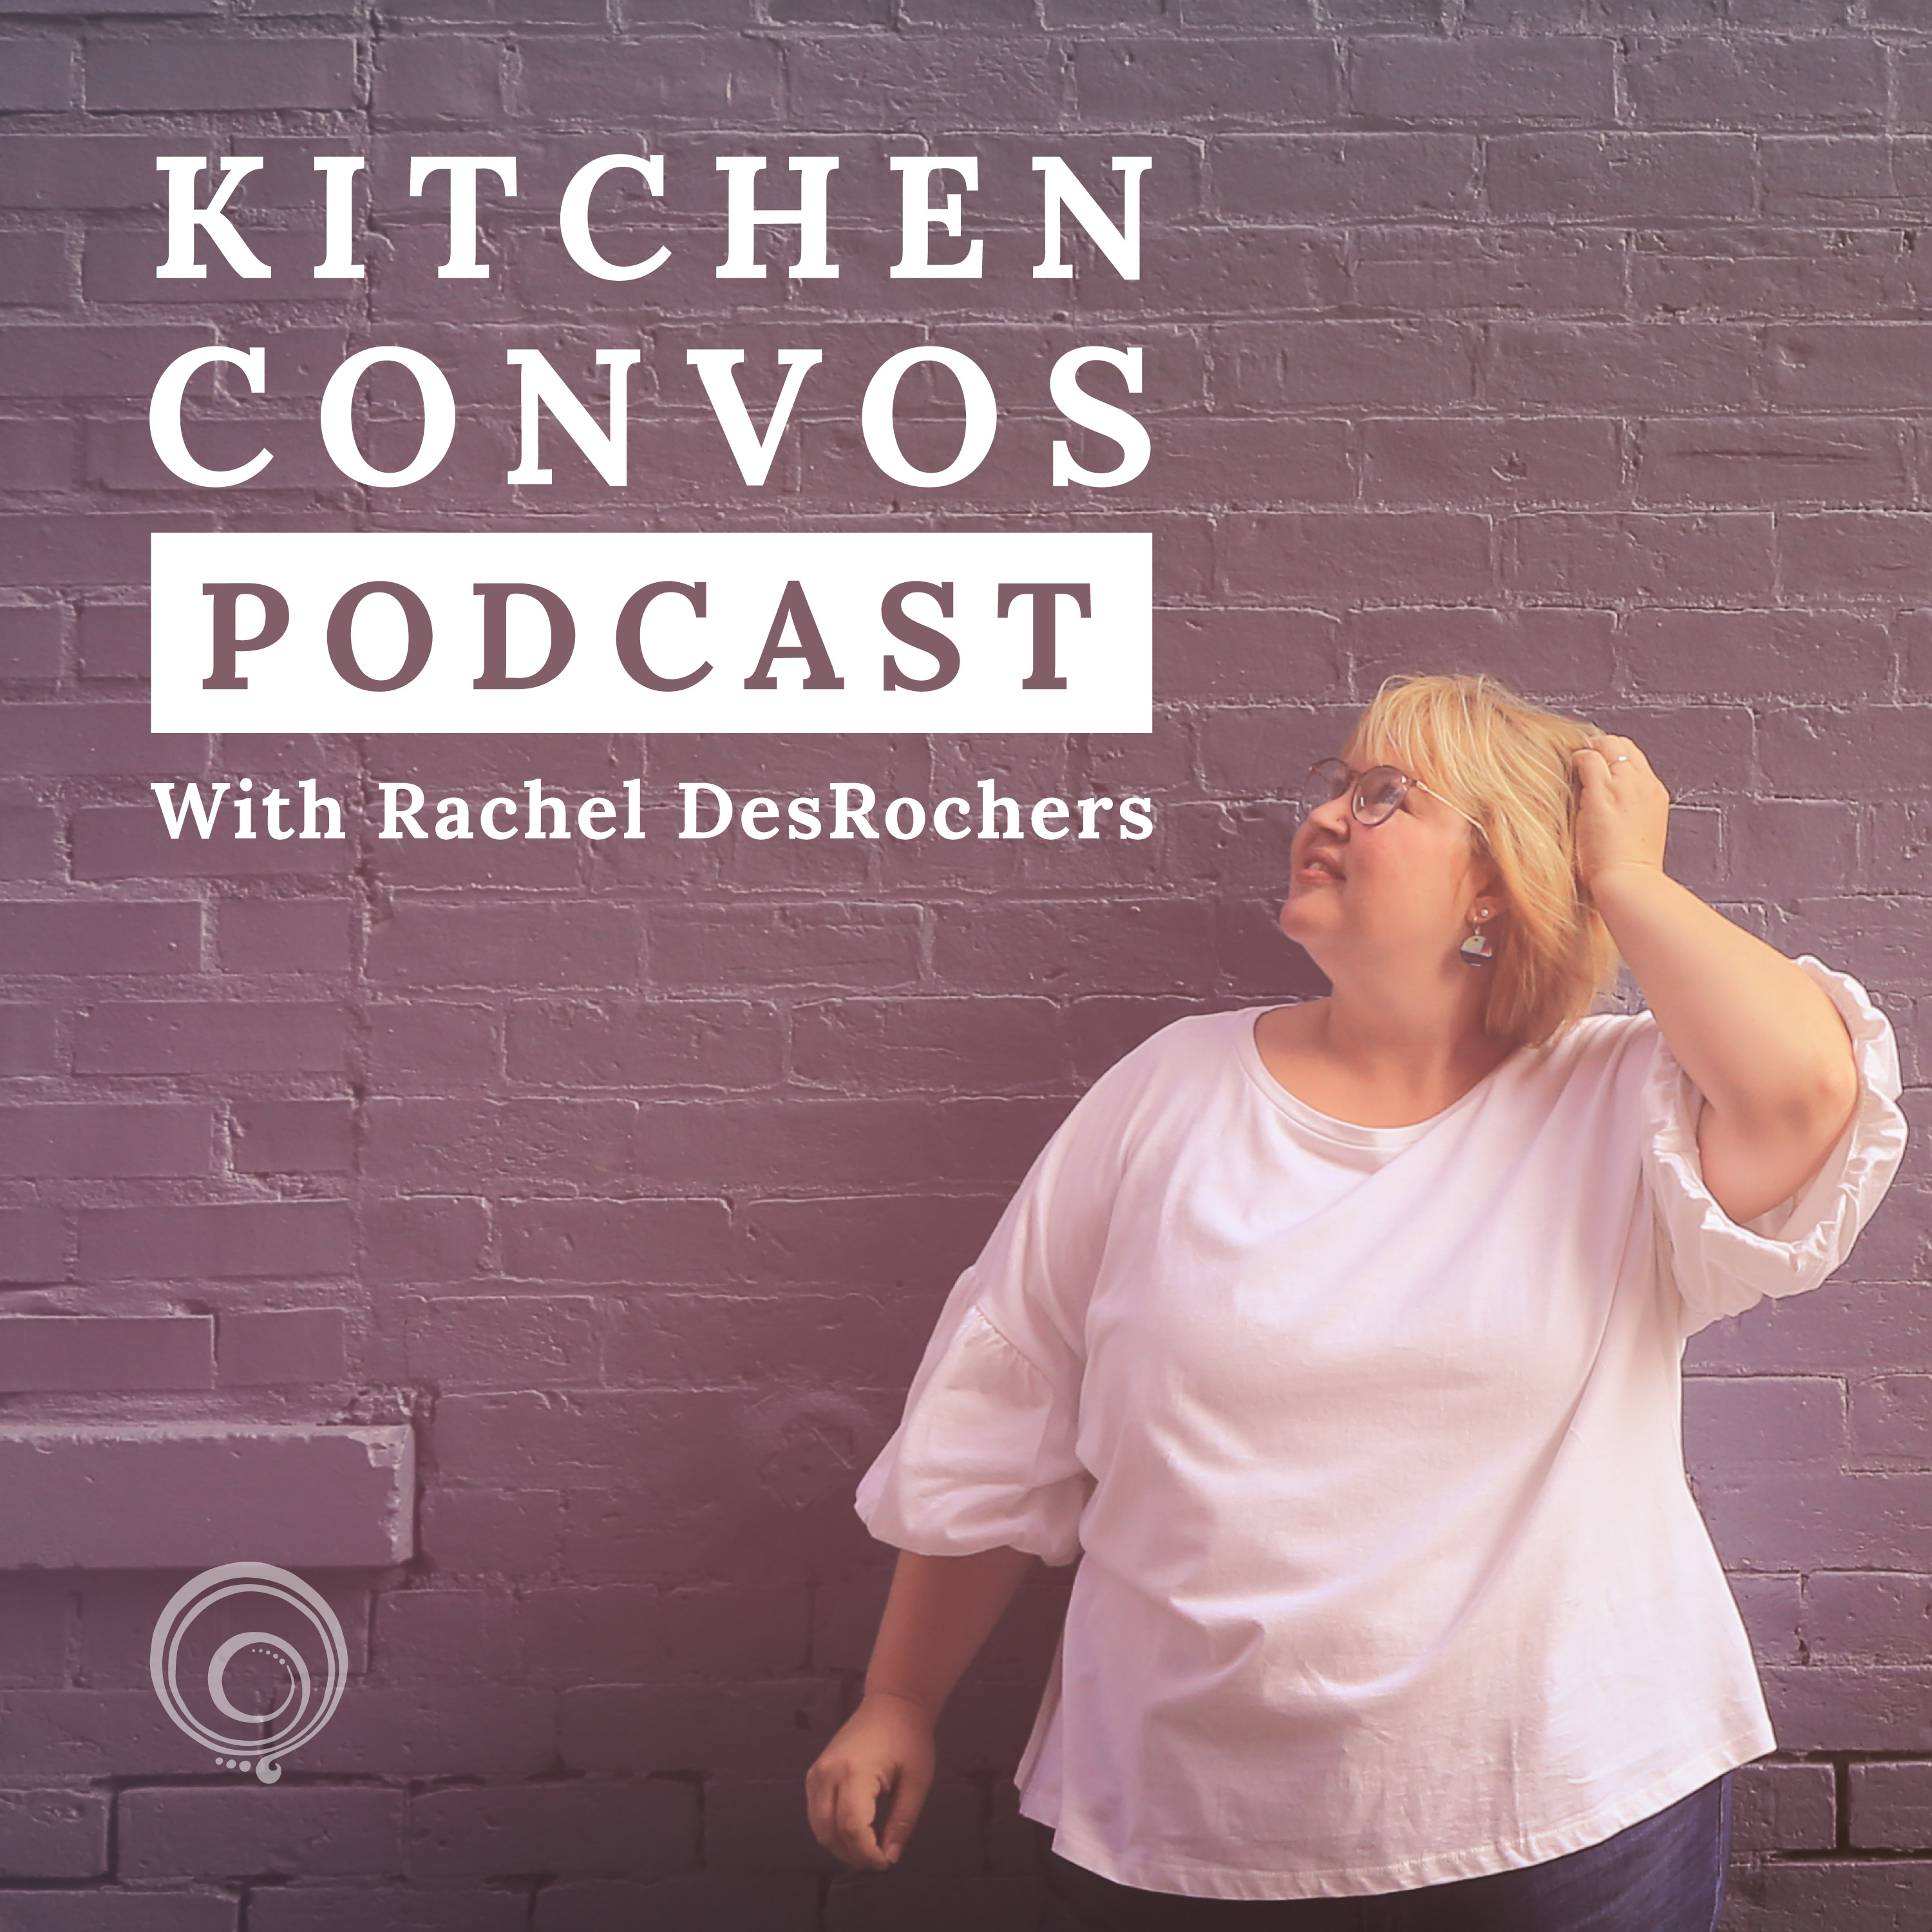 Kitchen Convos Podcast